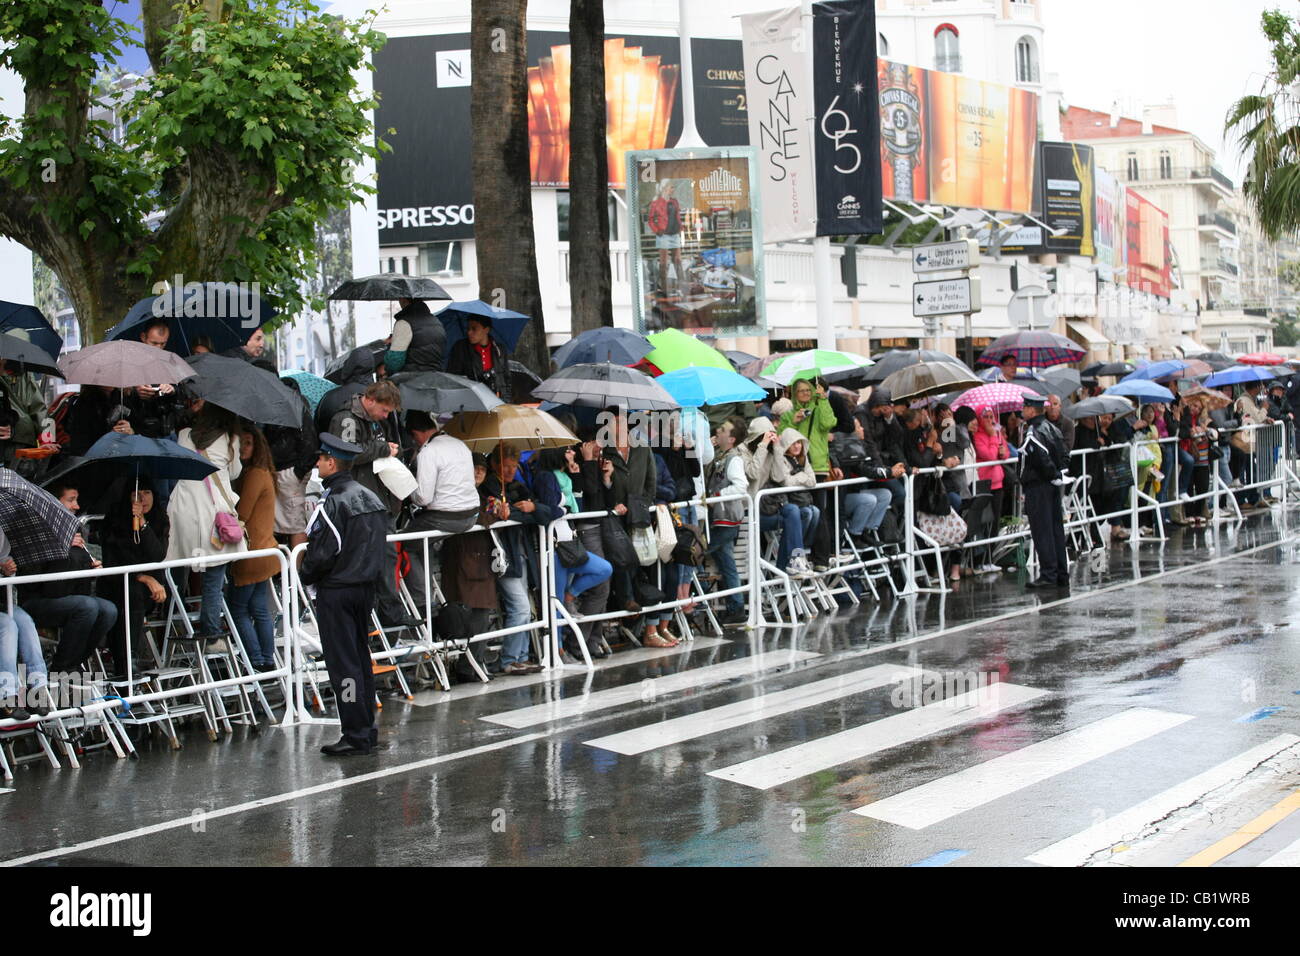 Crowds wait to see the arrivals for the Vous N'Avez Encore Rien Vu gala screening at the 65th Cannes Film Festival France. Monday 21st May 2012 in Cannes Film Festival, France. Stock Photo